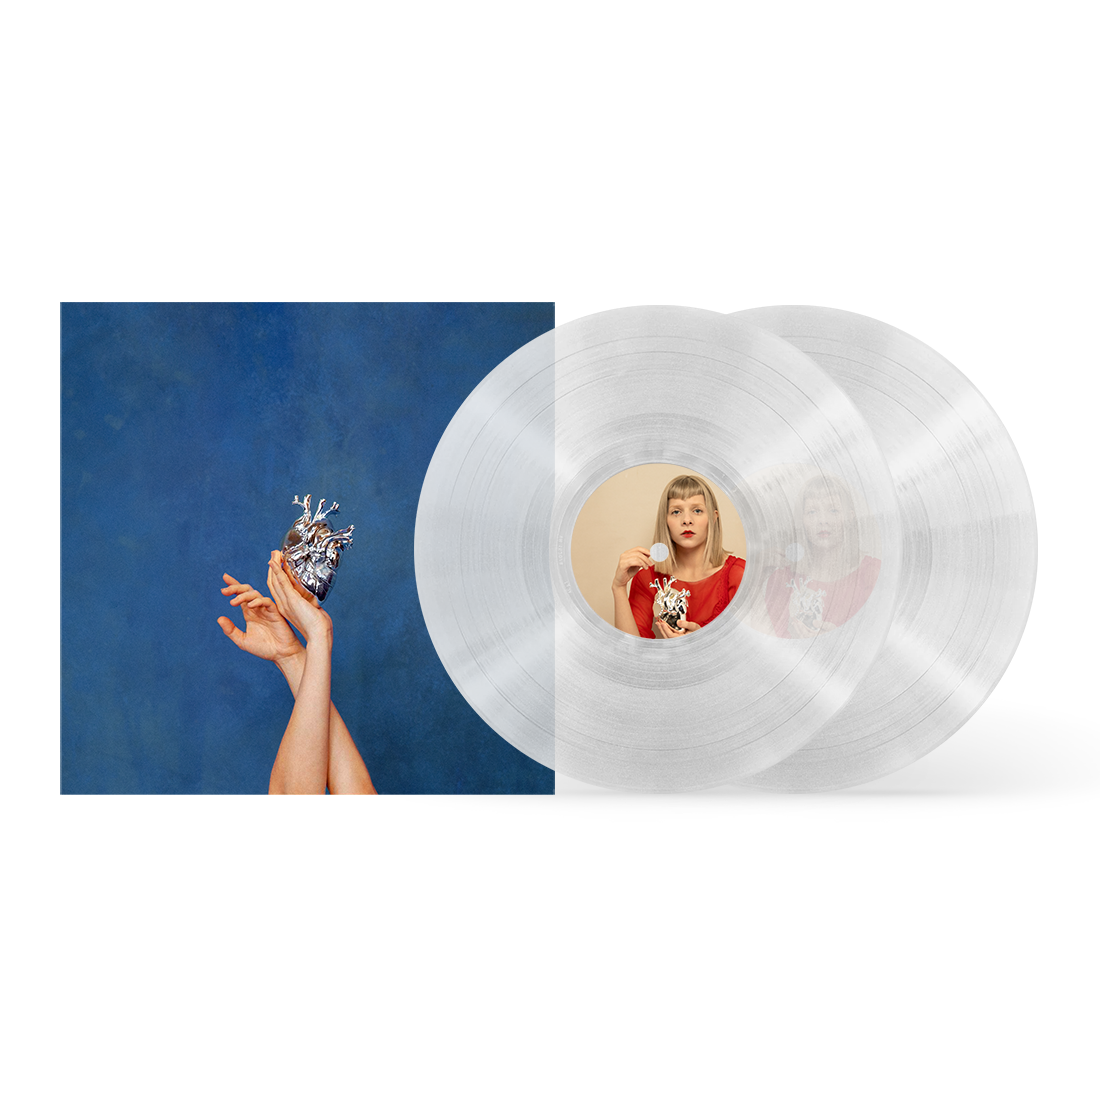 Aurora - What Happened To The Heart? Limited Clear Vinyl 2LP